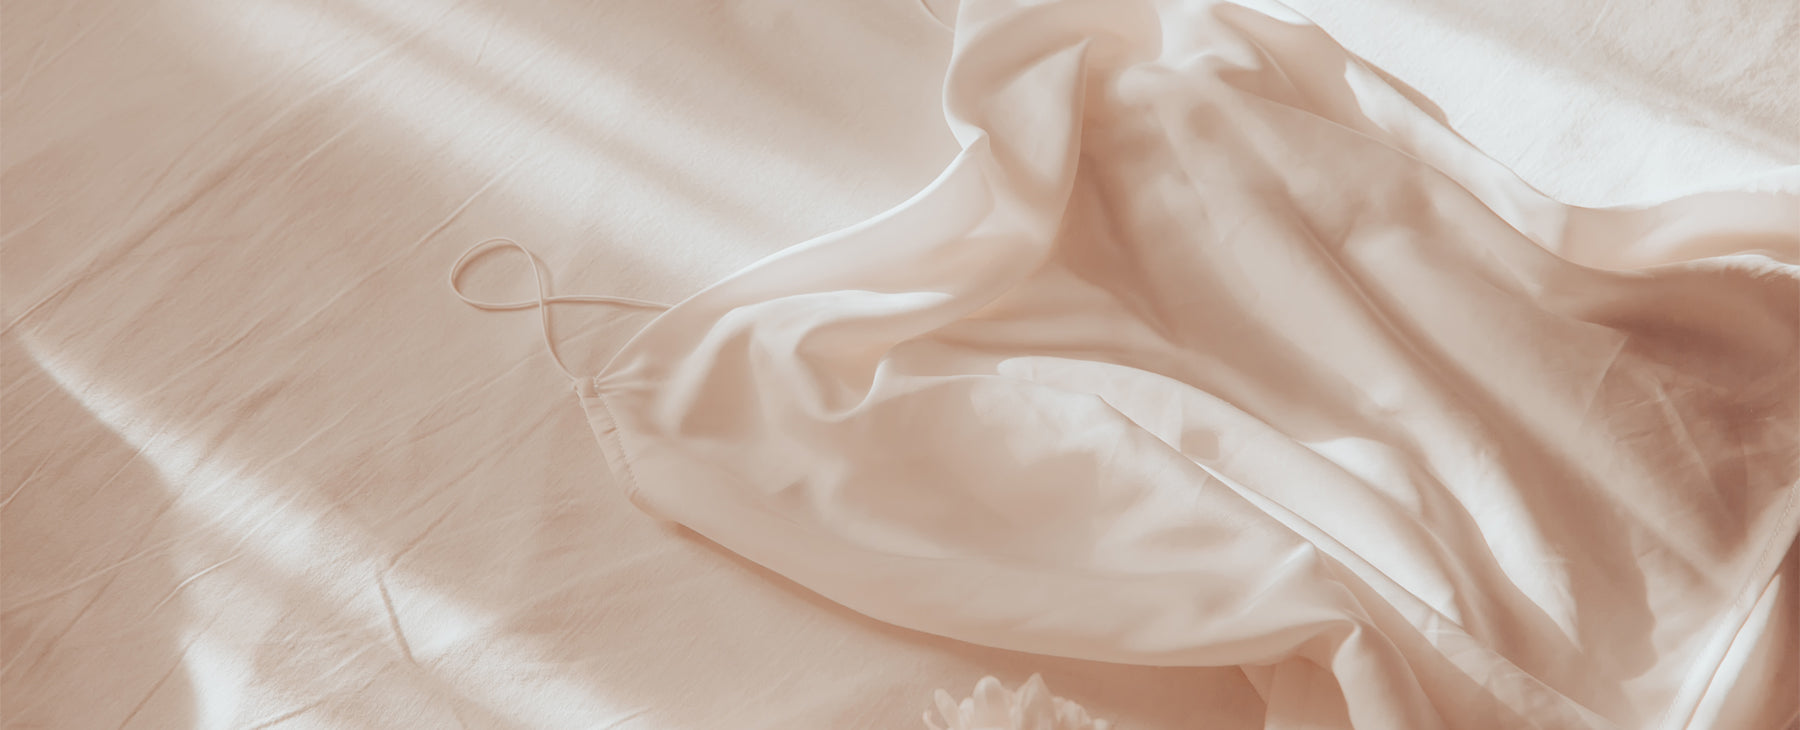 Can You Iron Satin? Tips and Precautions